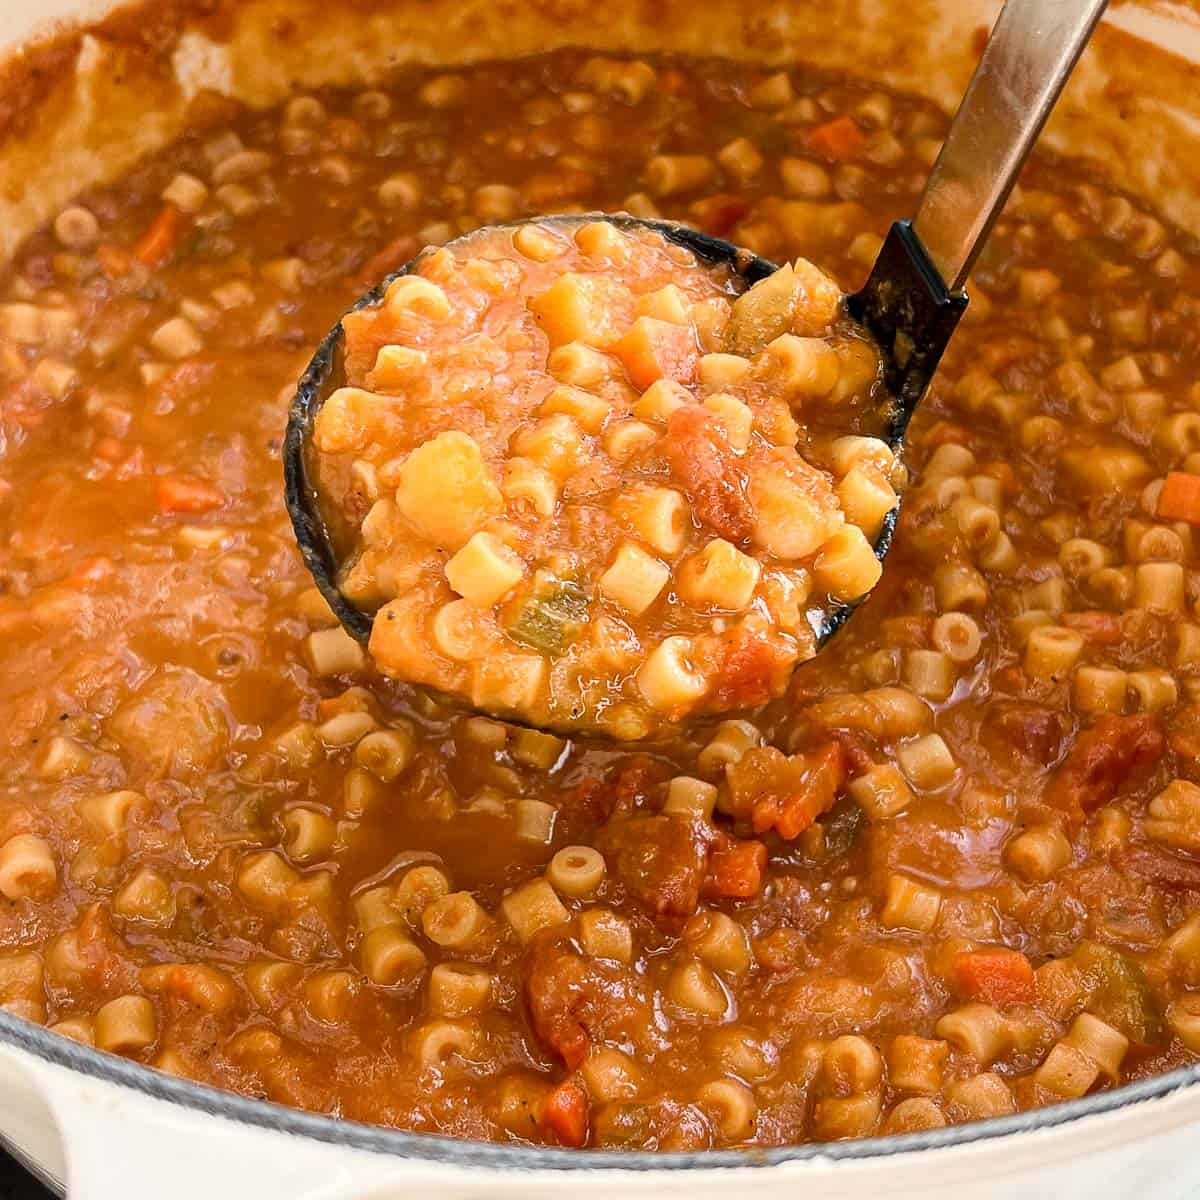 Image showing ladleful of Pasta Fagioli over a pot of soup.